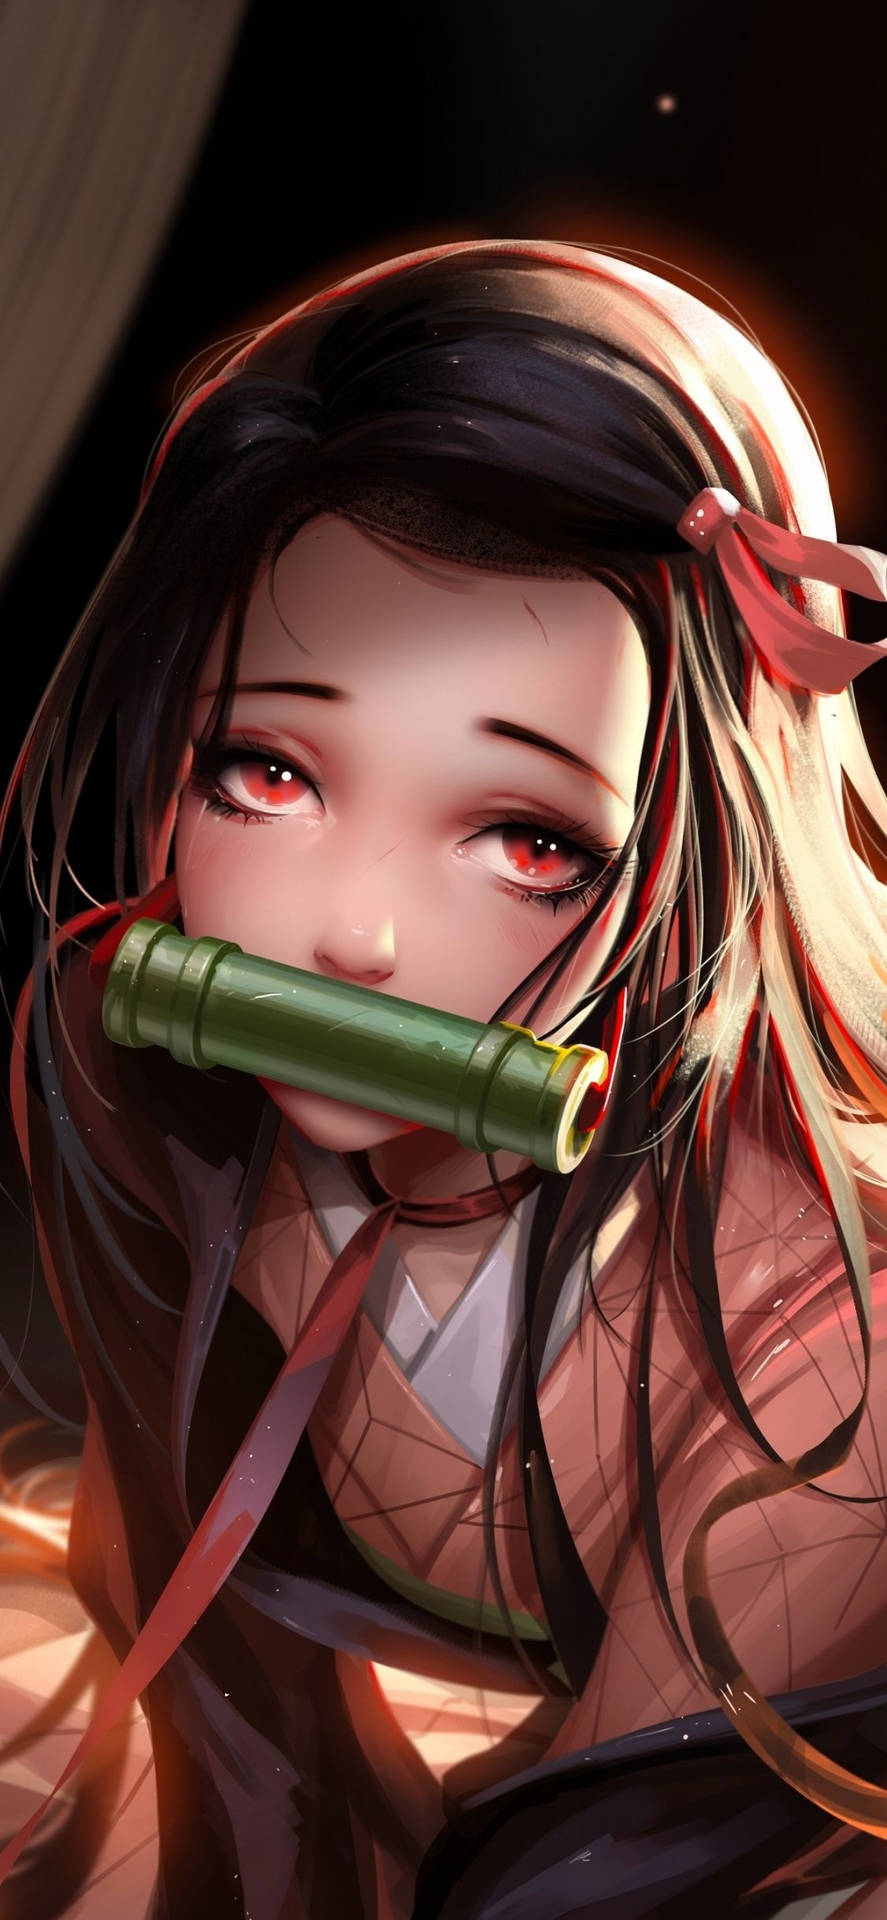 Get the Nezuko Iphone for a phone that looks as cool as she does! Wallpaper